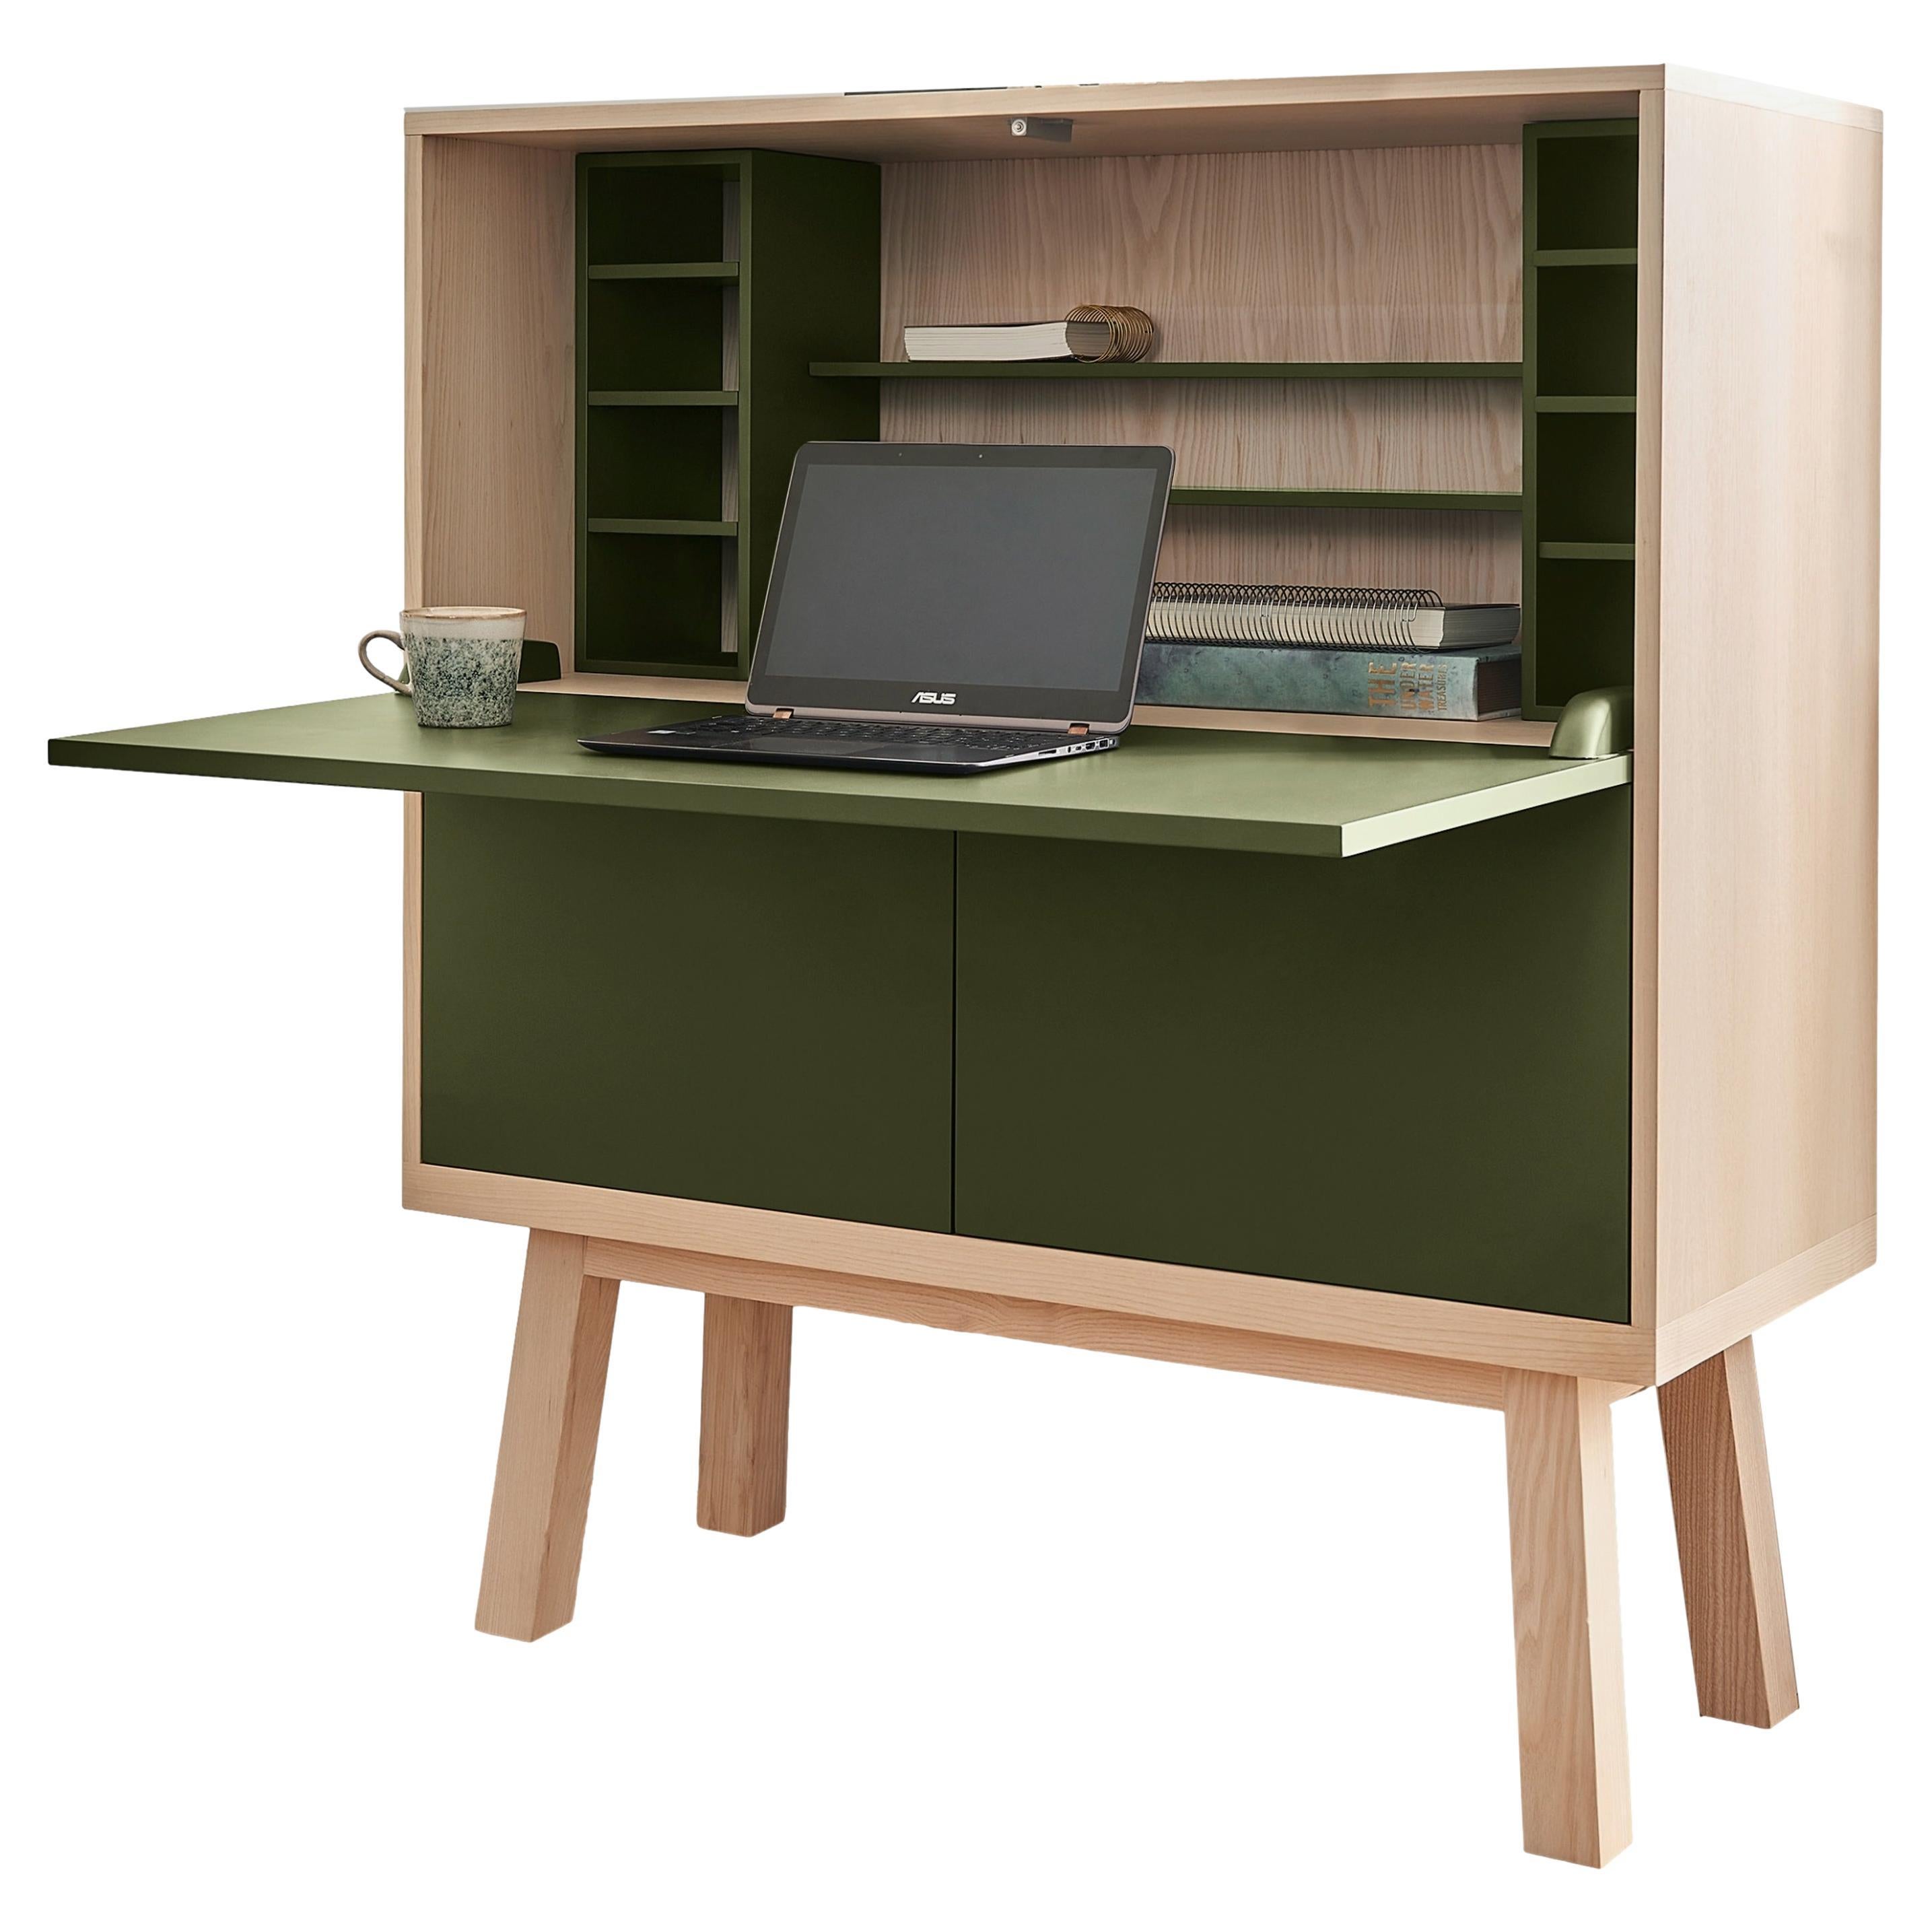 Green Lacquered Large French Secrétaire, Designed for a Durable Teleworking For Sale